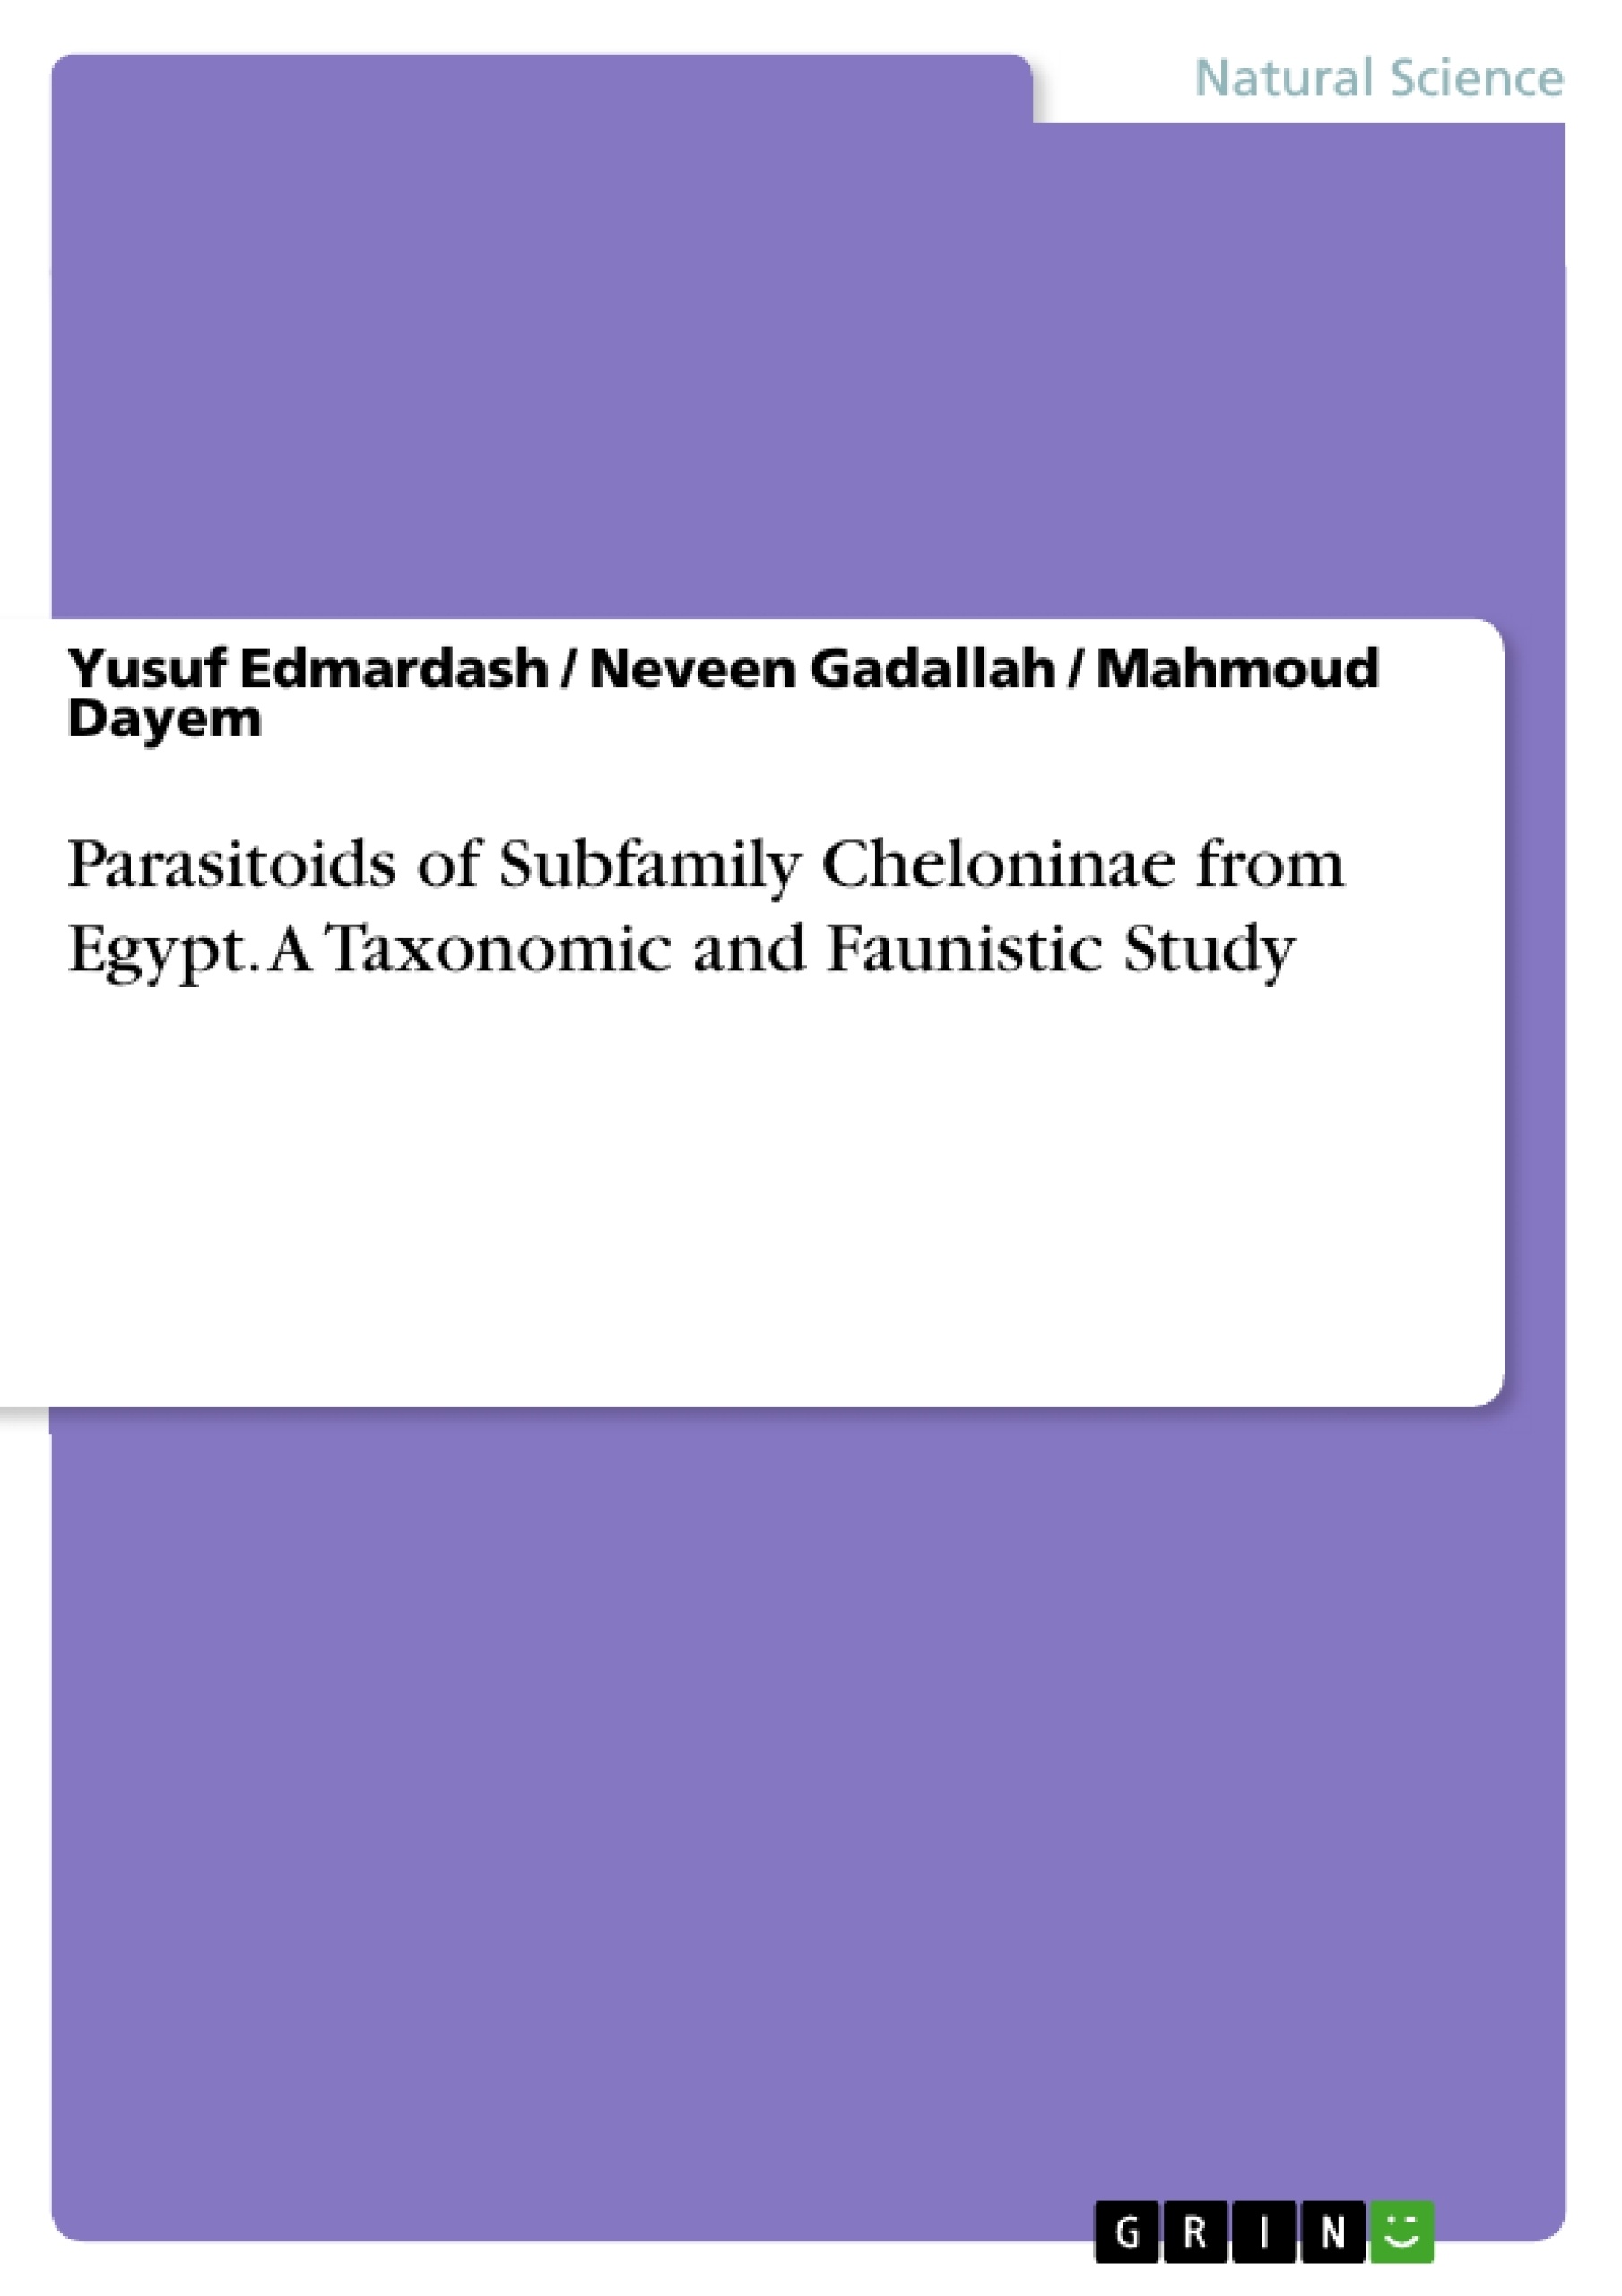 Title: Parasitoids of Subfamily Cheloninae from Egypt. A Taxonomic and Faunistic Study